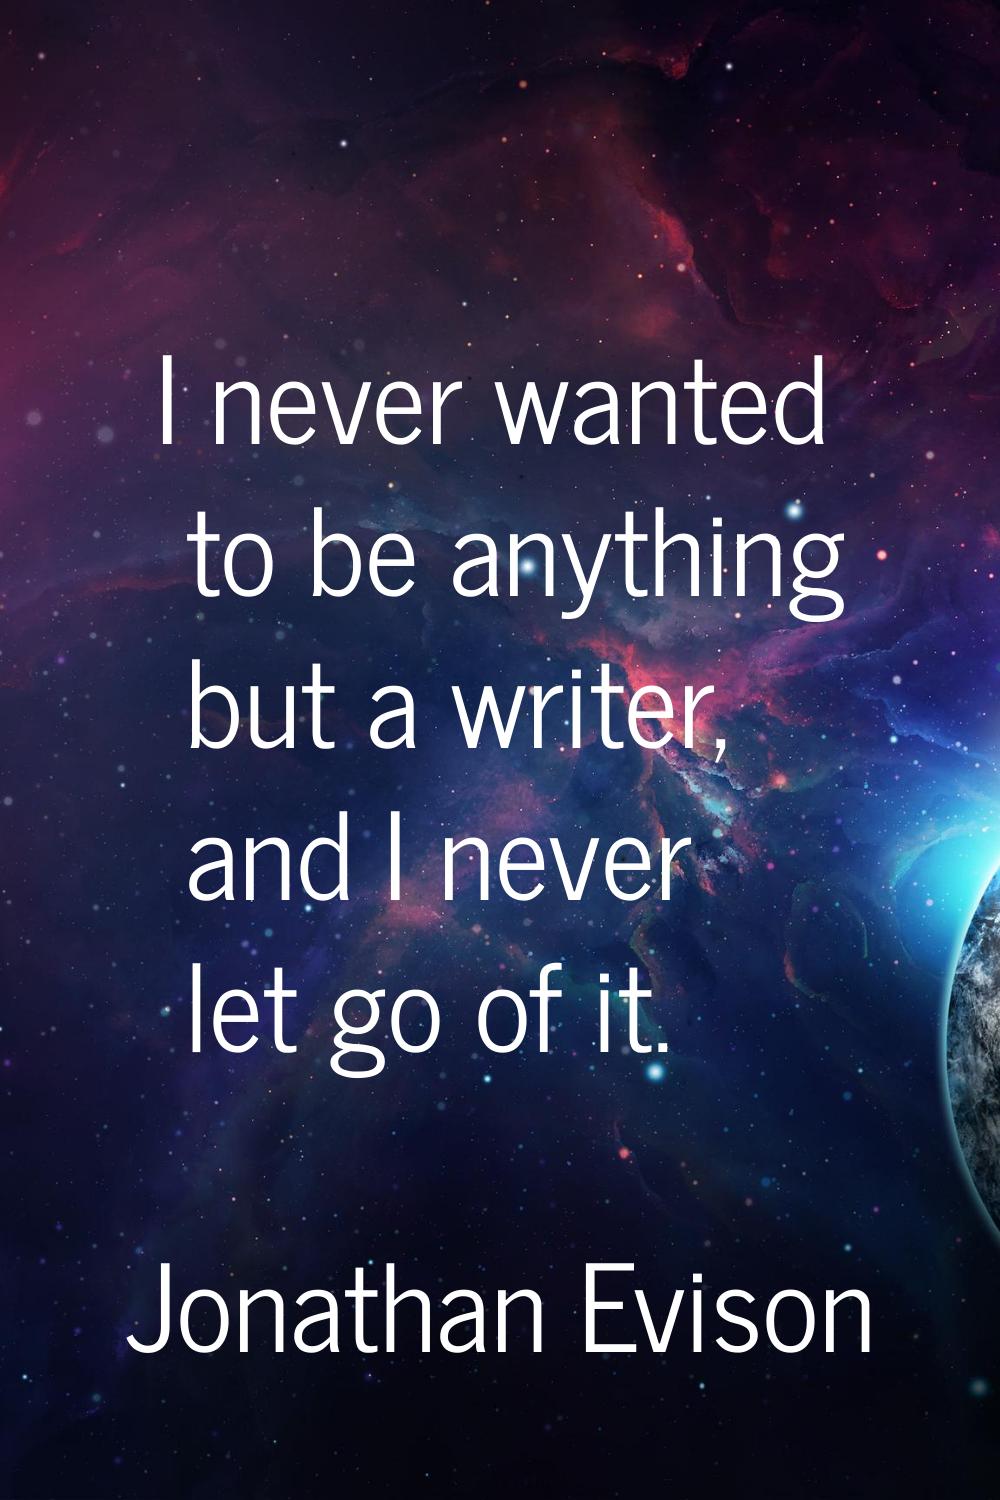 I never wanted to be anything but a writer, and I never let go of it.